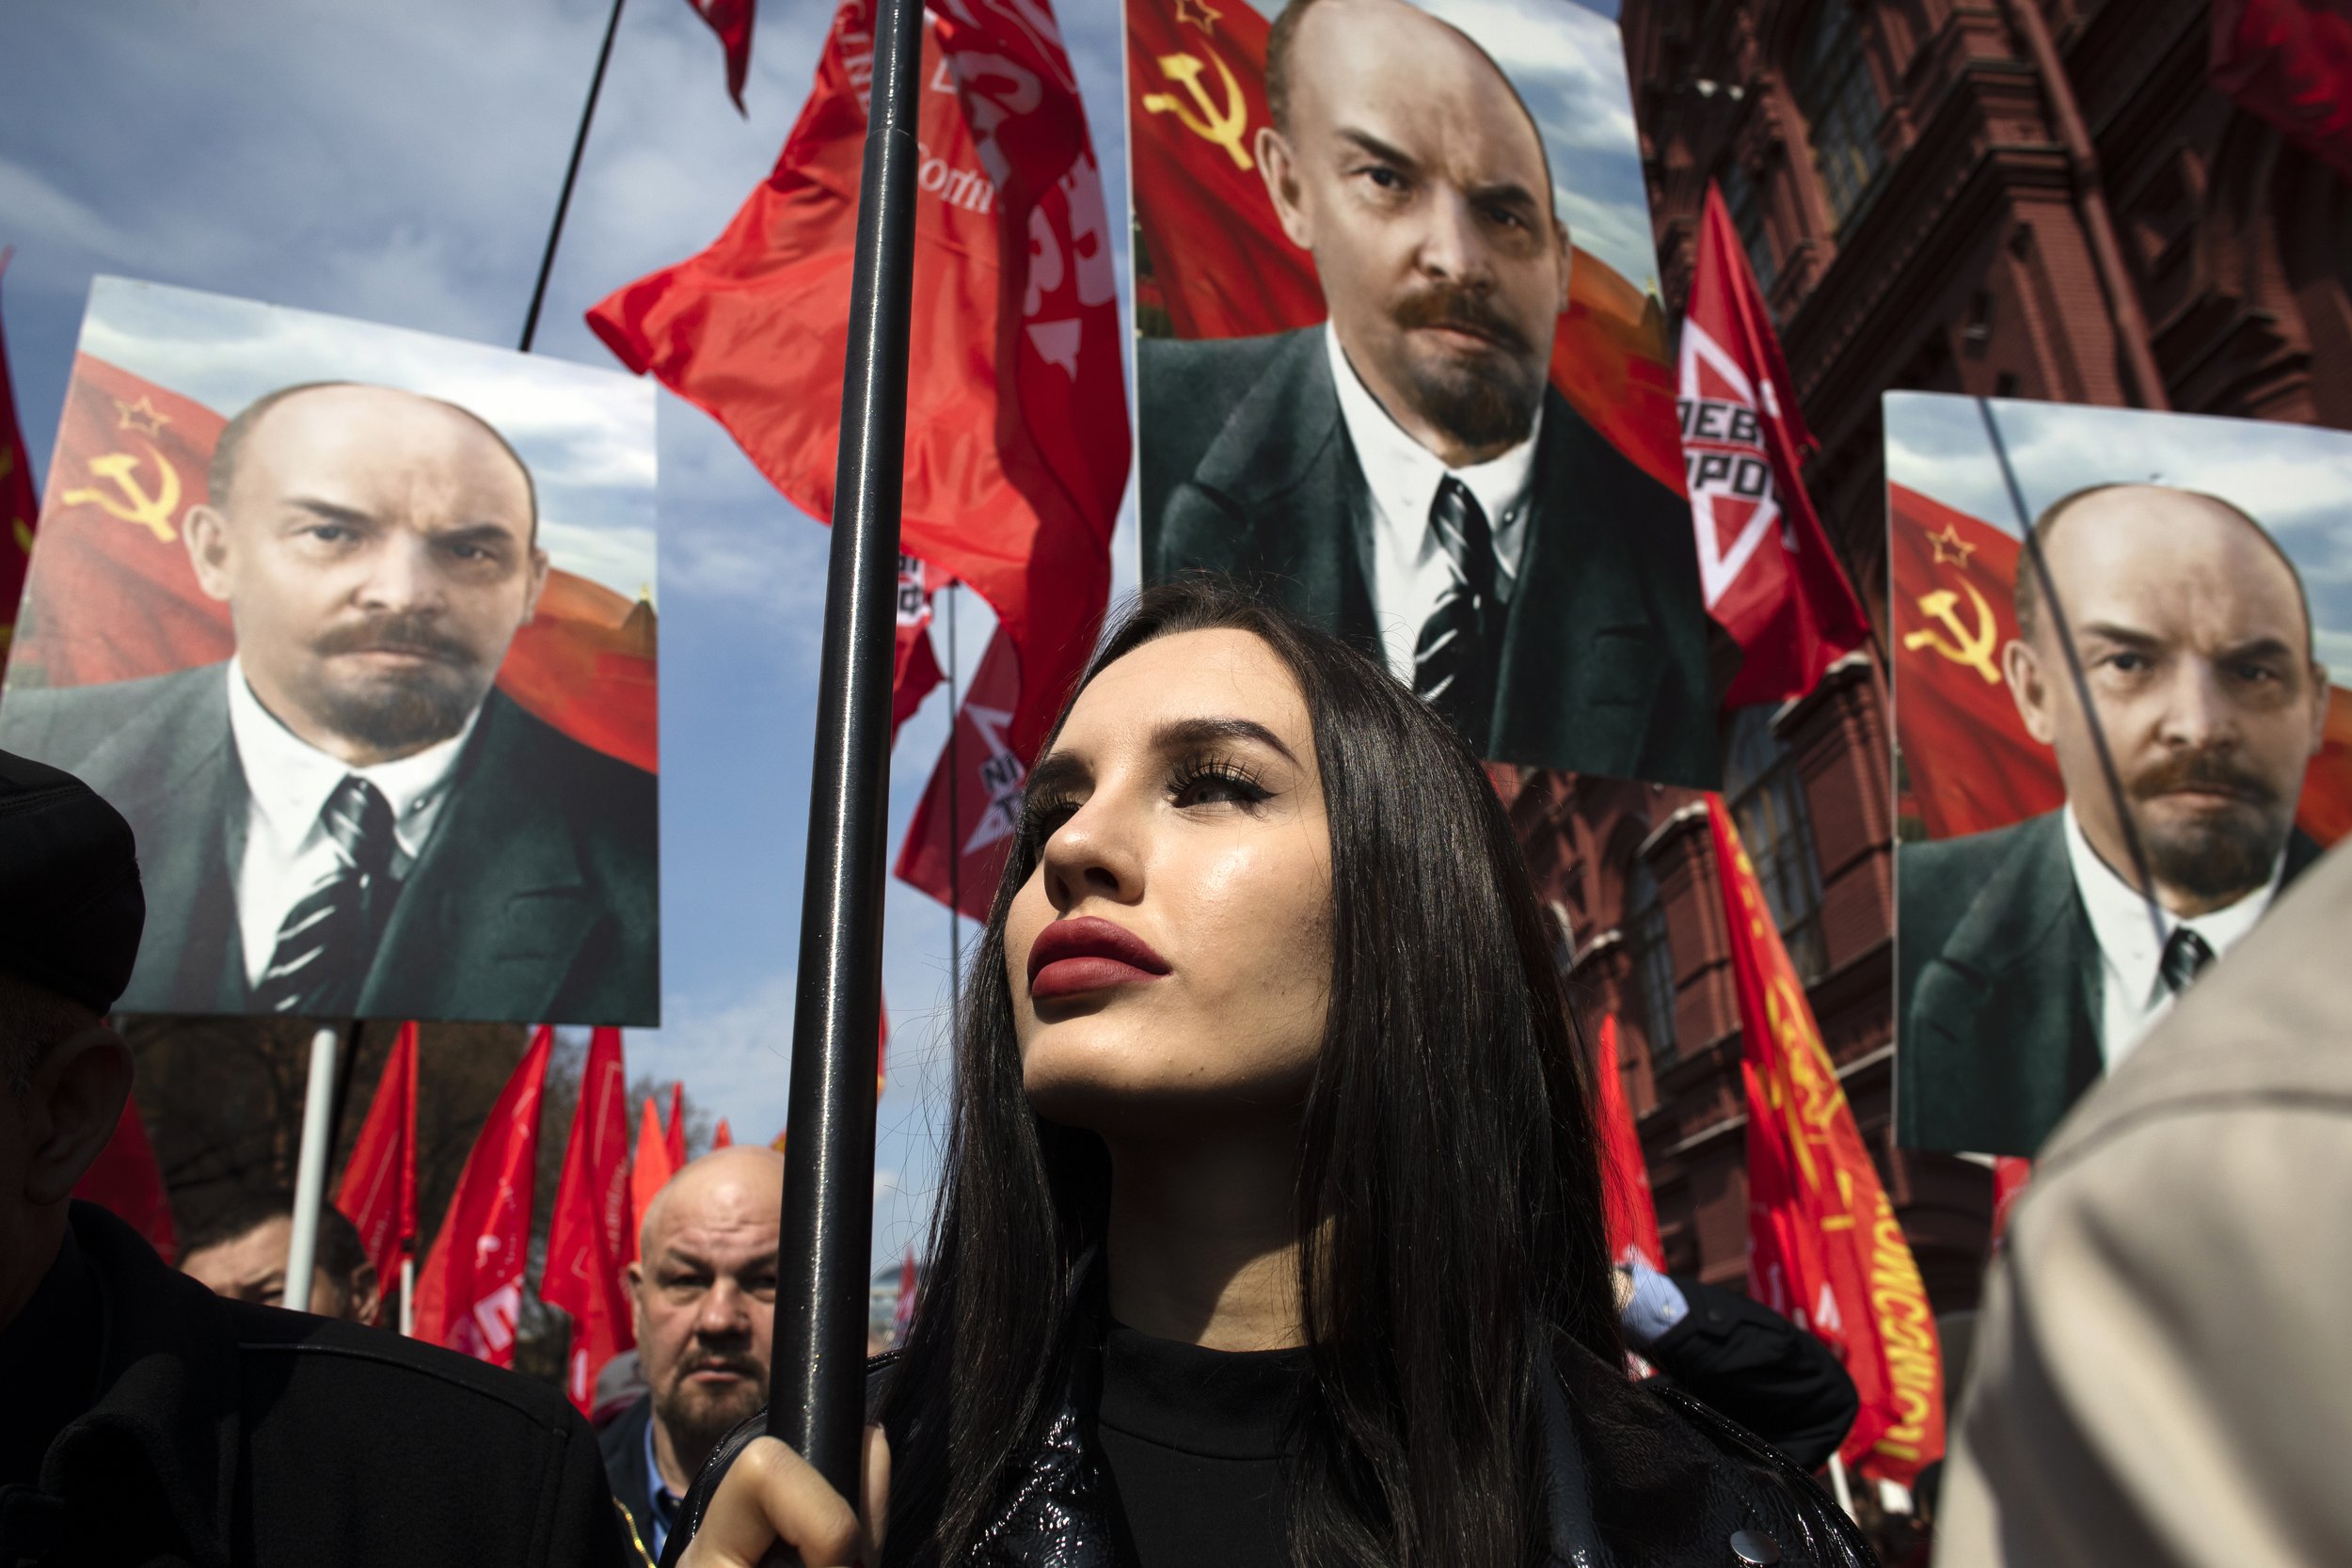  Russian communist supporters hold flags and portraits of Vladimir Lenin as they walk to the mausoleum housing the Soviet founder’s remains to mark the 151st anniversary of his birth on April 22, 2021, in Moscow. (AP Photo/Pavel Golovkin) 